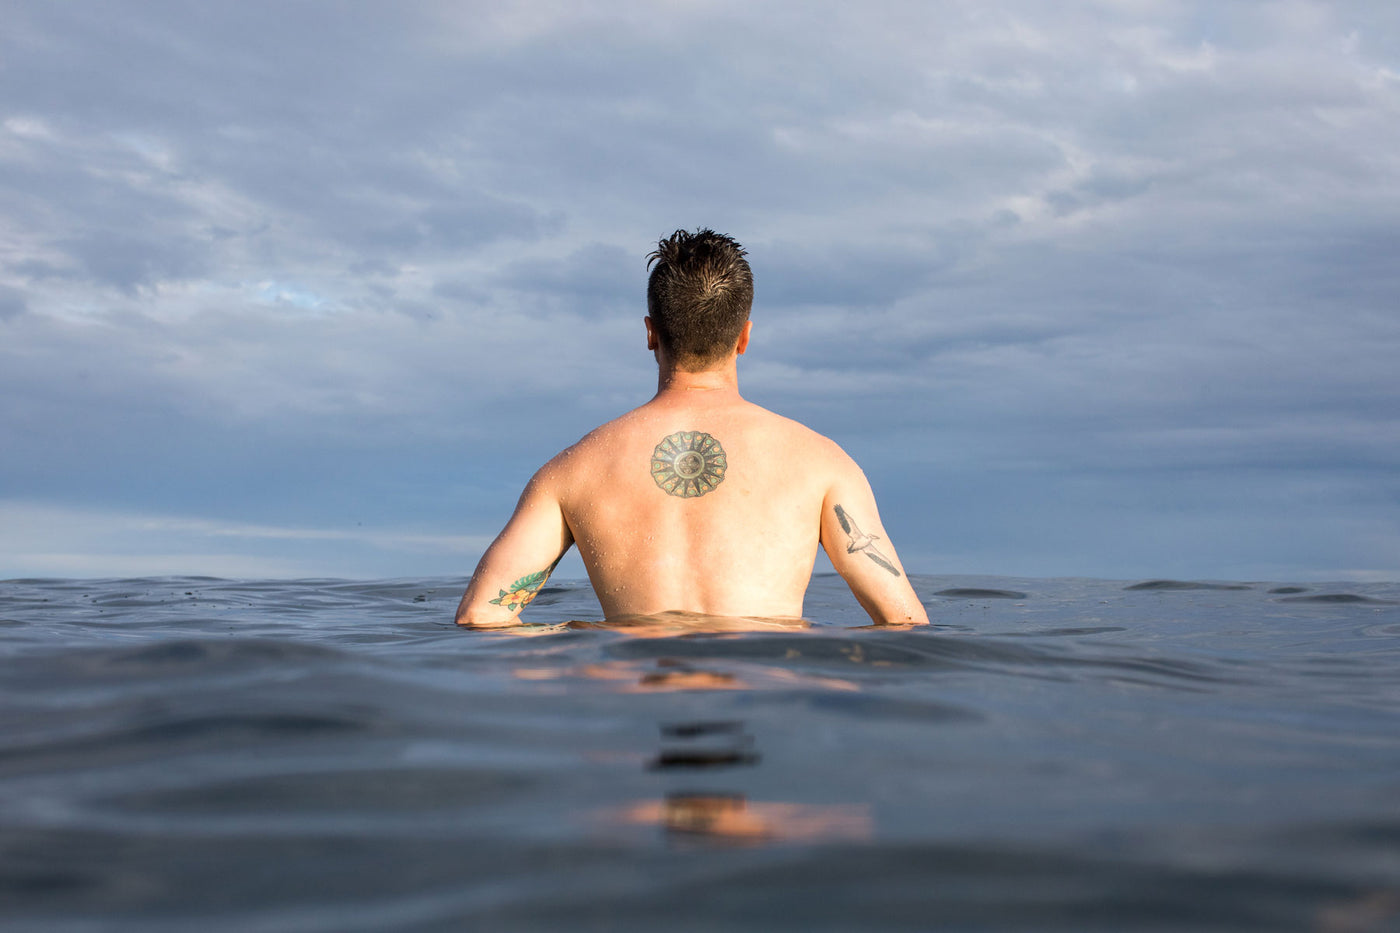 How a meditation practice can make you a better surfer